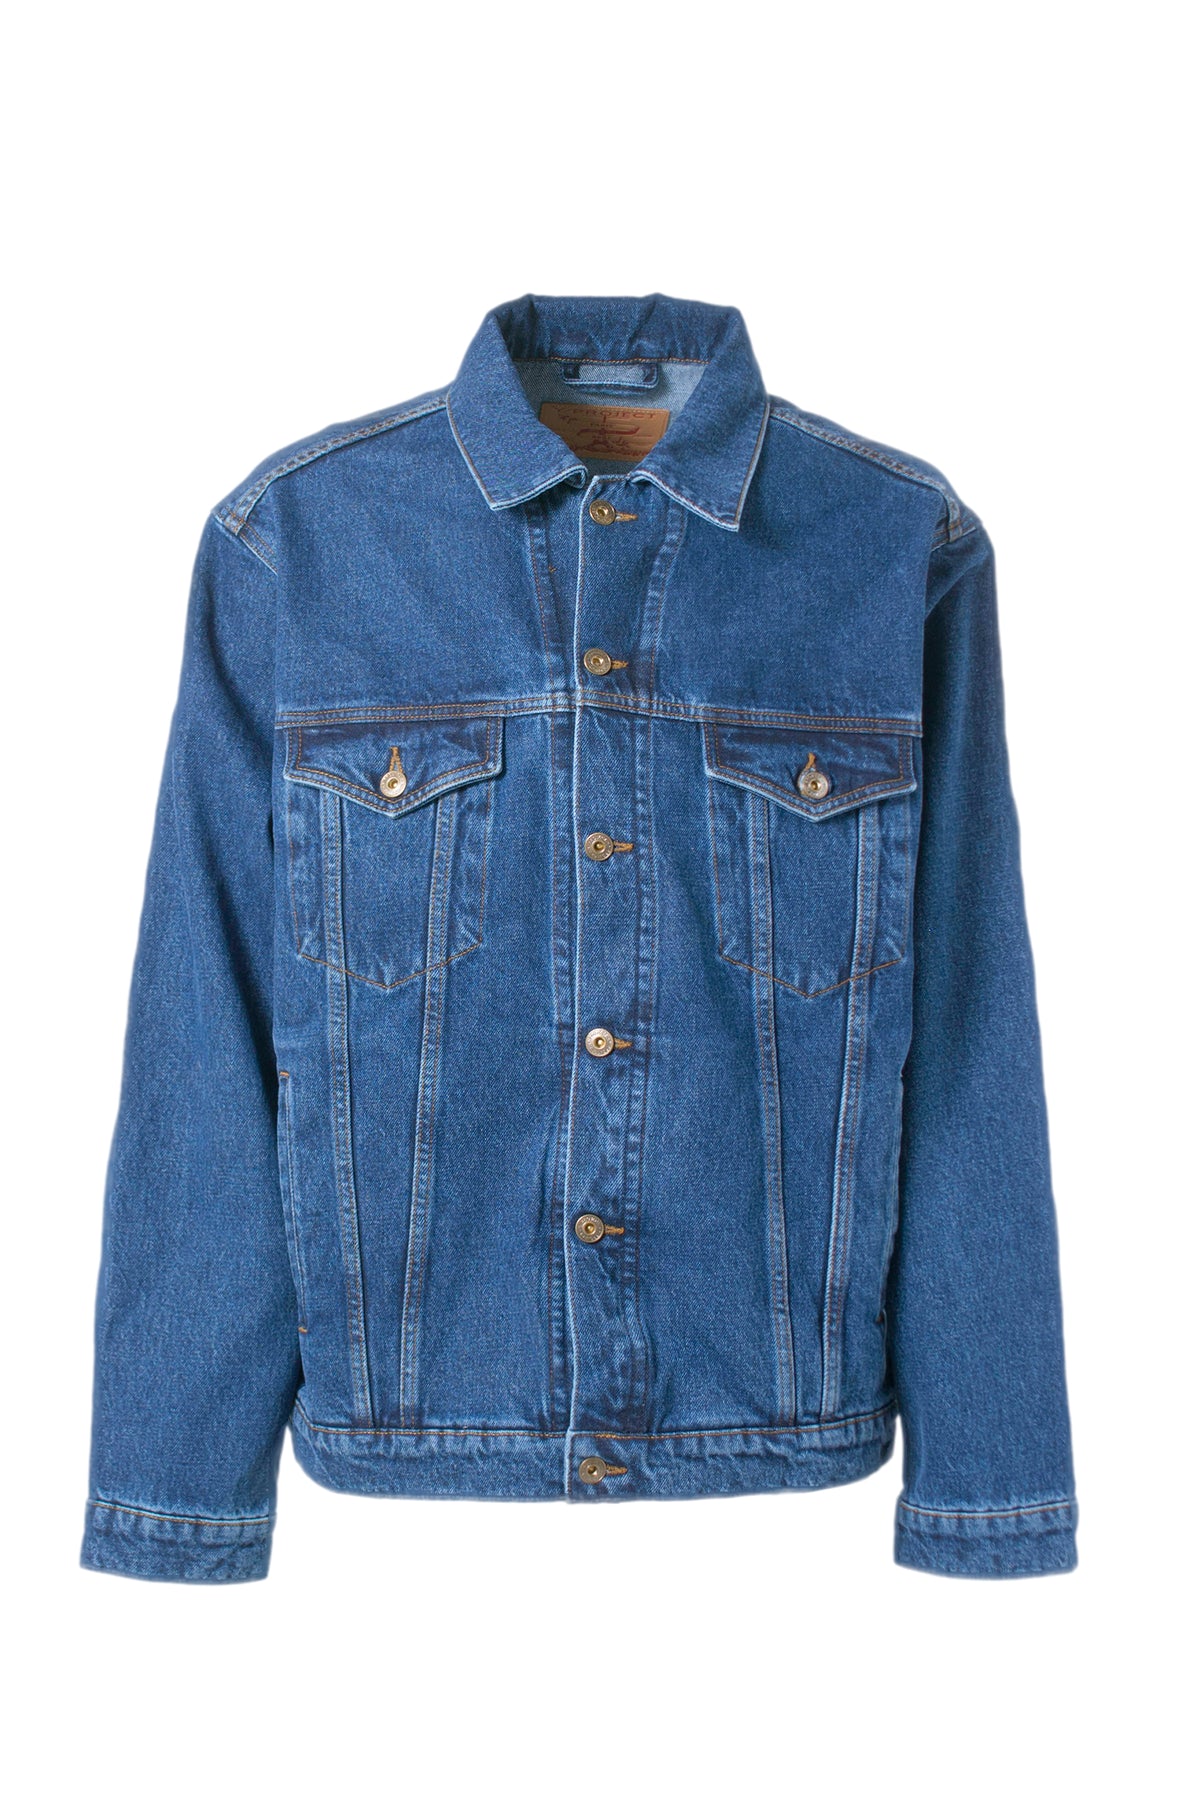 CLASSIC WIRE DENIM JACKET / NVY